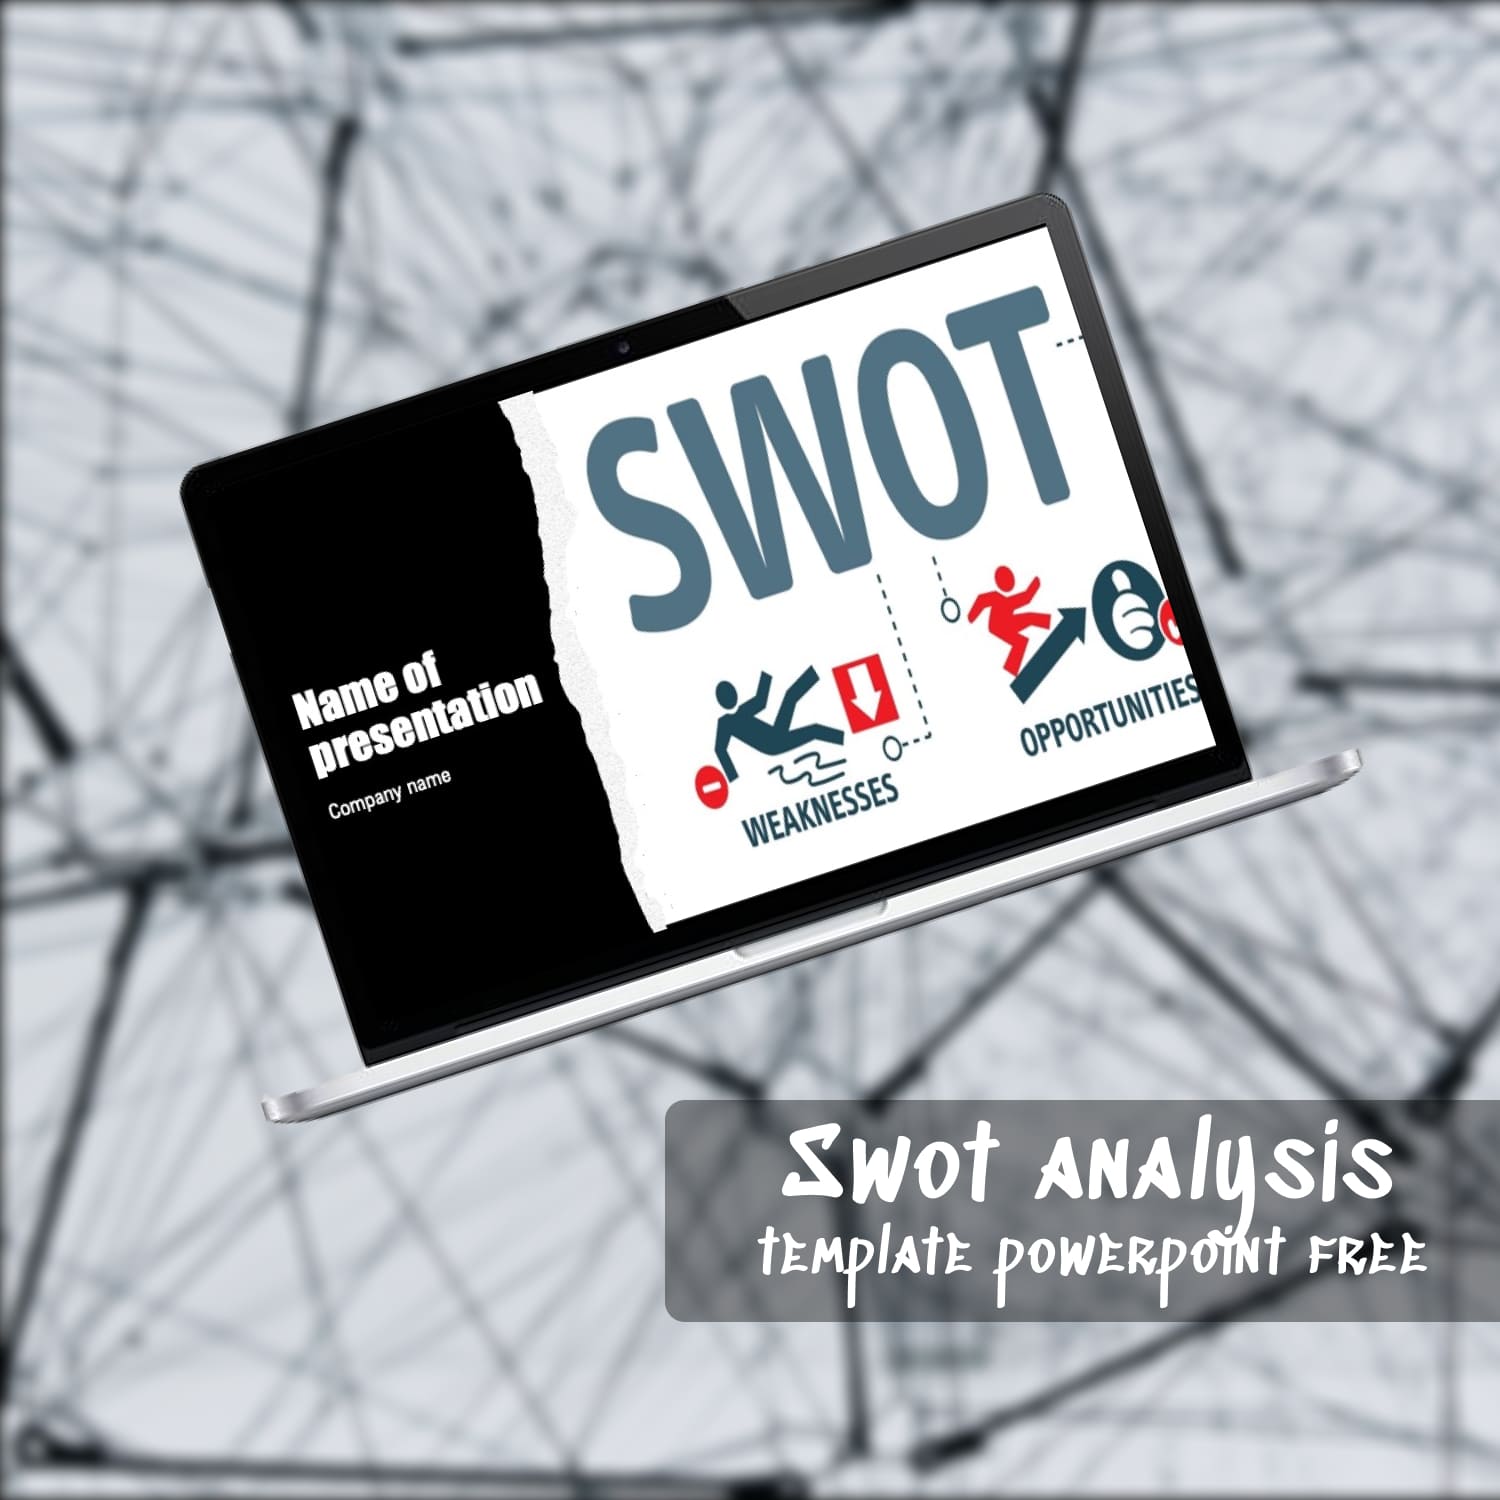 1500 1 SWOT Analysis Template Powerpoint Free.